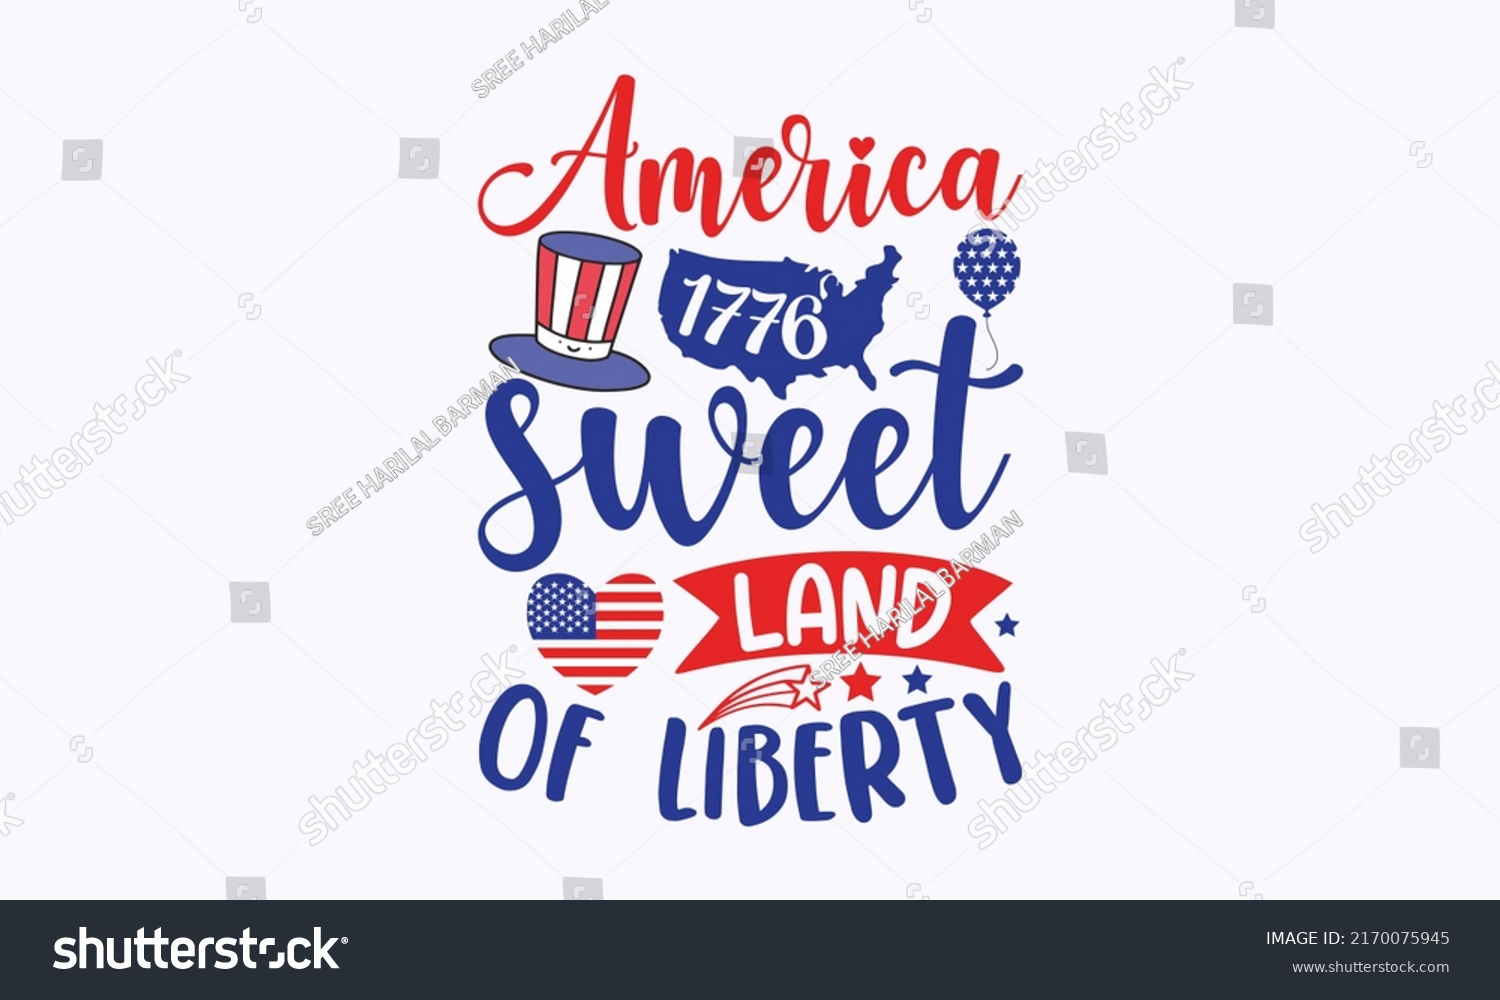 SVG of america 1776 sweet land of liberty -  4th of July fireworks svg for design shirt and scrapbooking. Good for advertising, poster, announcement, invitation, Templet svg